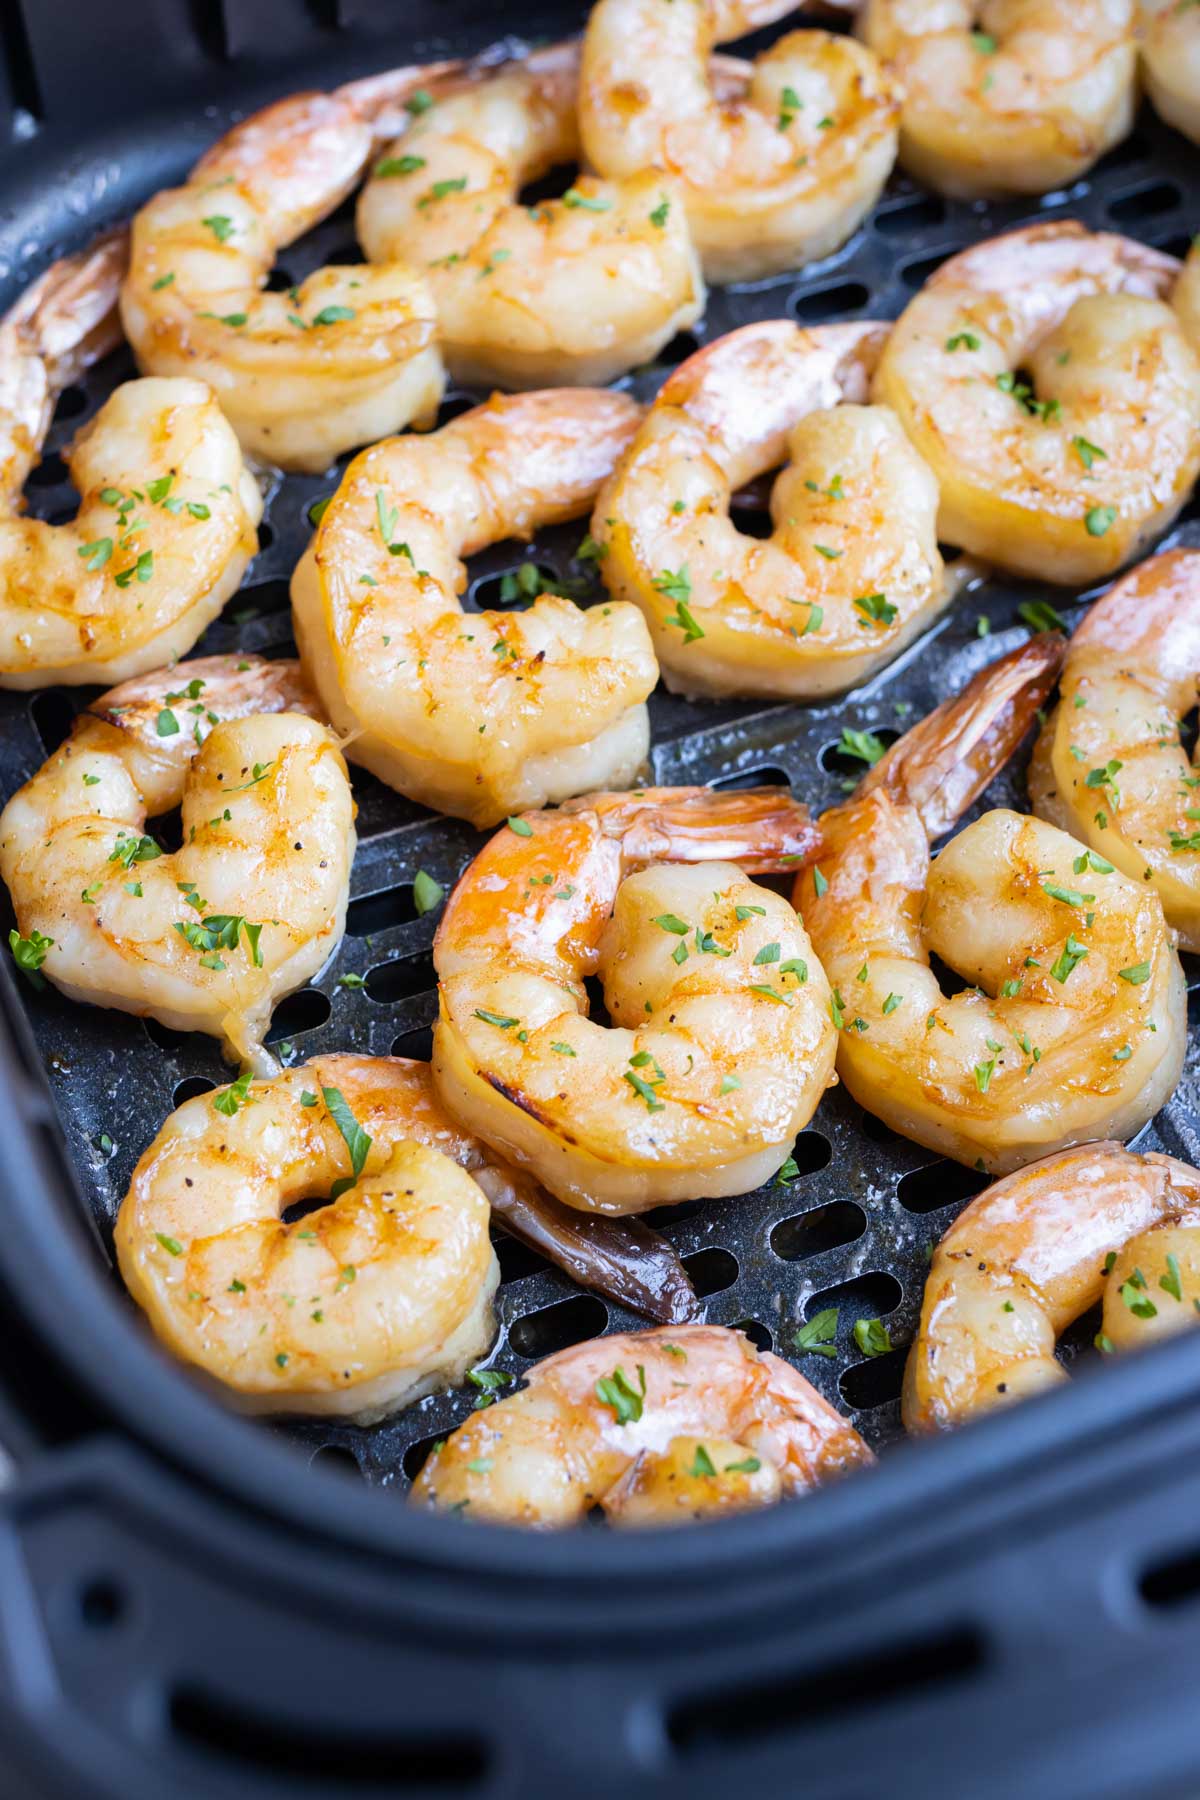 Season shrimp with lemon and parsley after air frying.